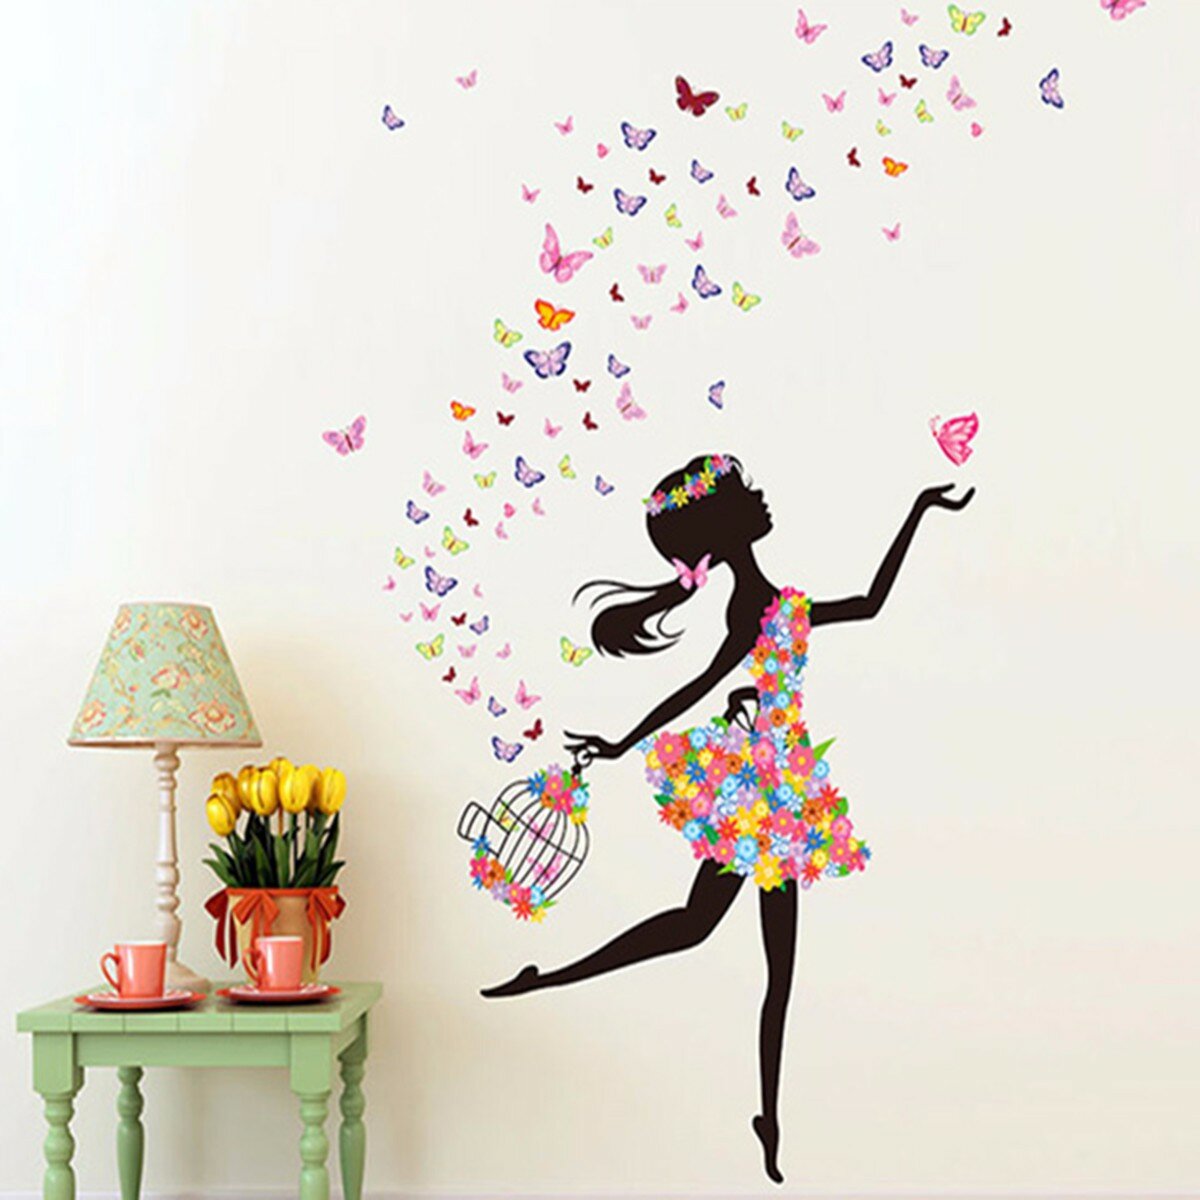 DIY Wall Stickers Flower Elf Dance Girl Butterfly Wallpaper Wall Decal Home Office Living Room Child